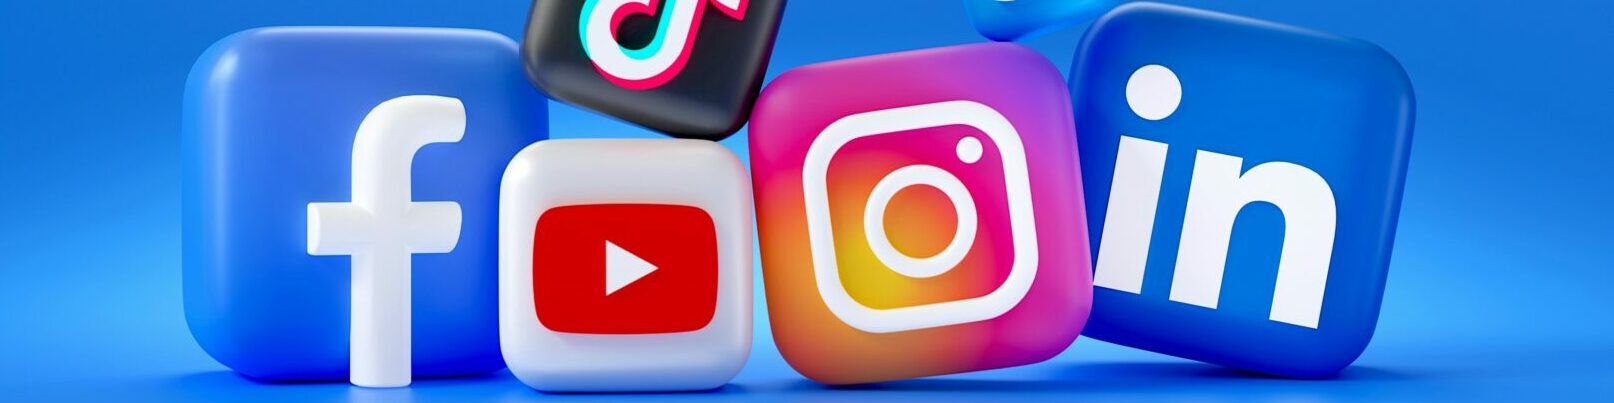 Blue background with five blocks that include the following social media logos: Facebook, TikTok, YouTube, LinkedIn and Instagram.